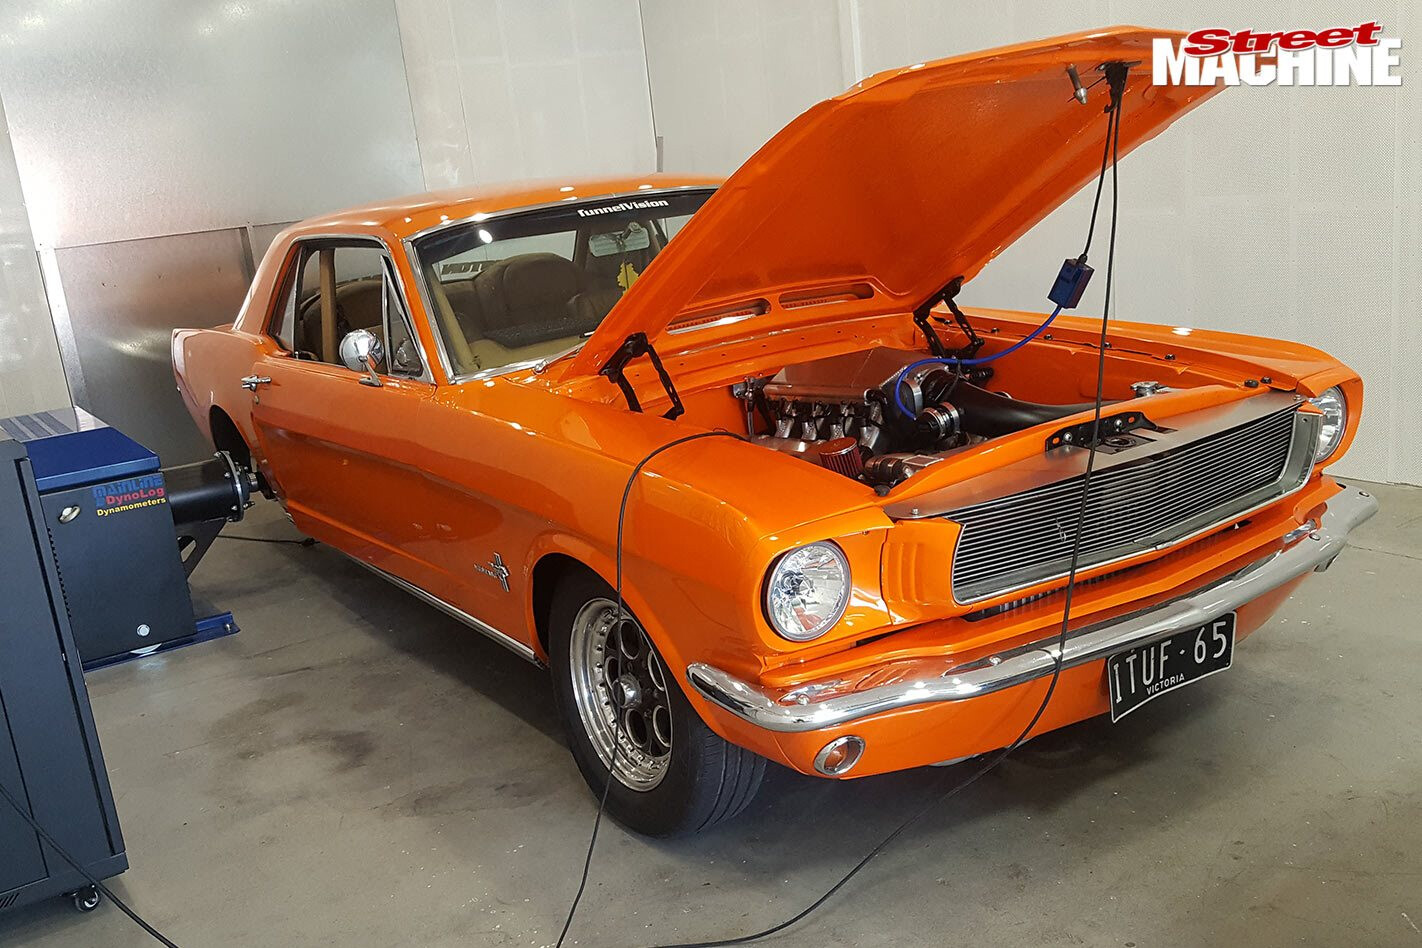 1965 Mustang with a twin-turbo 427 Windsor makes over 1500hp – Video